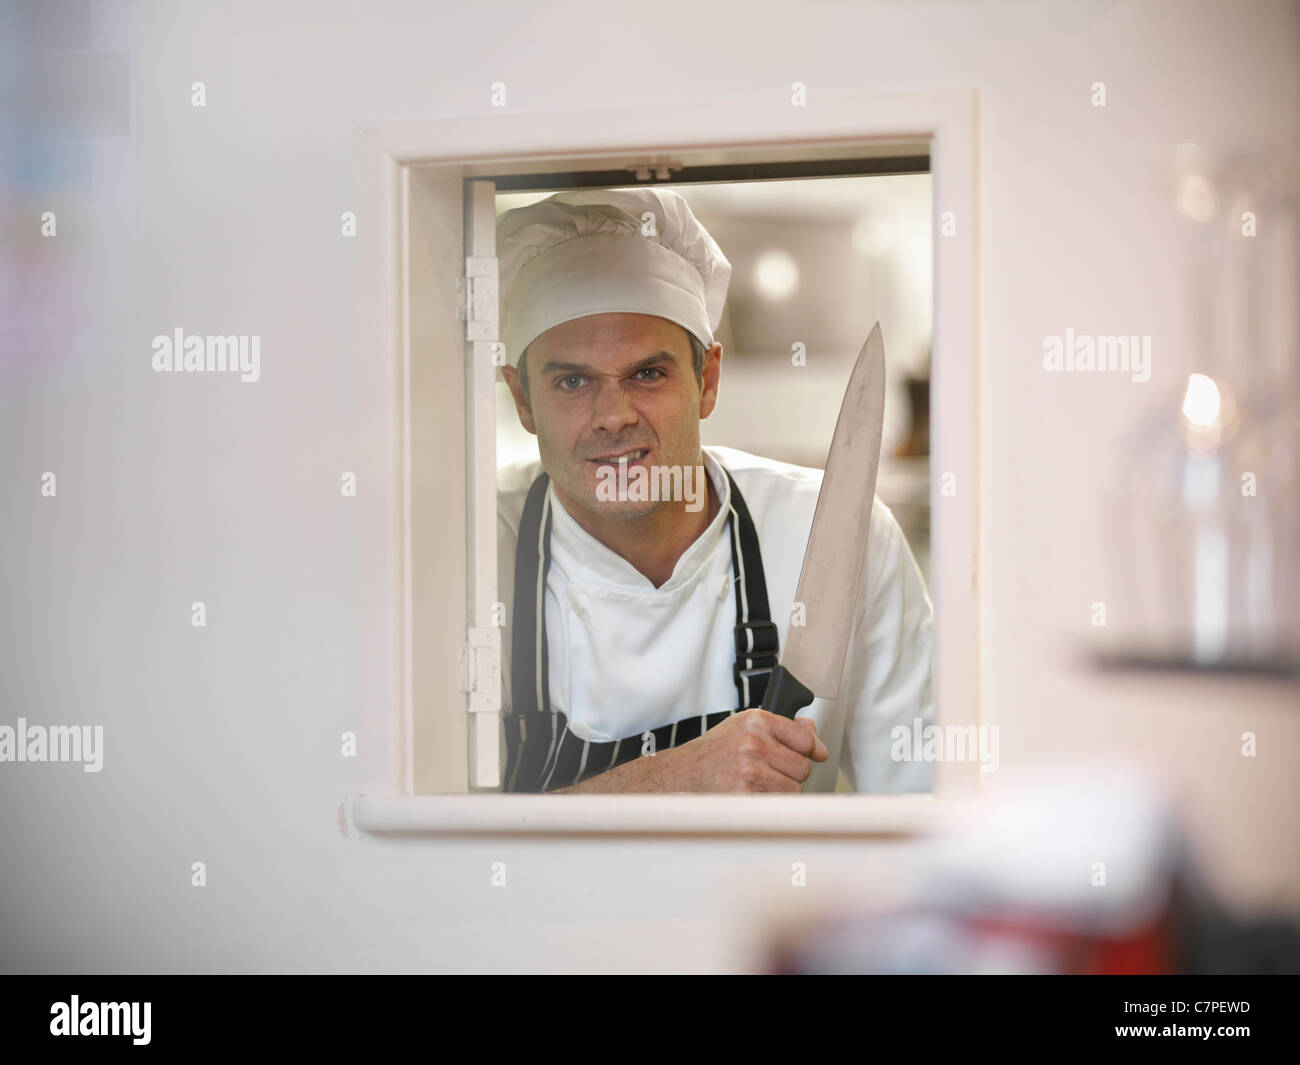 Chef holding large knife in restaurant Stock Photo